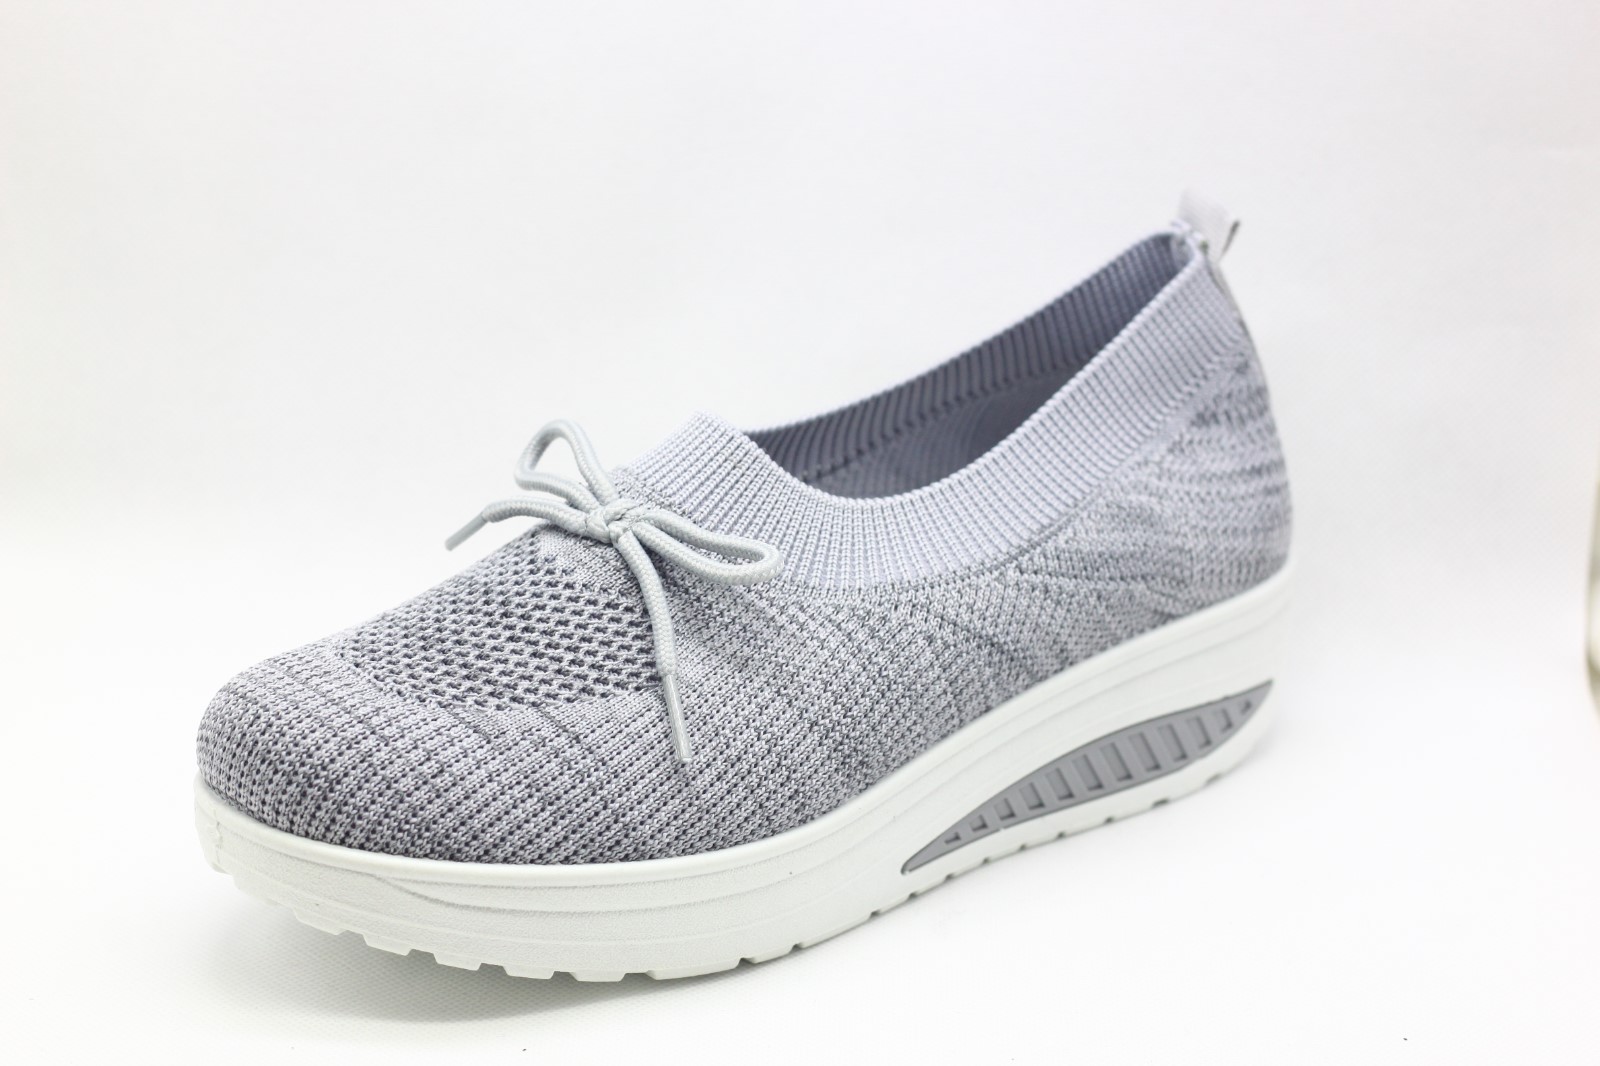 new canvas shoes 218